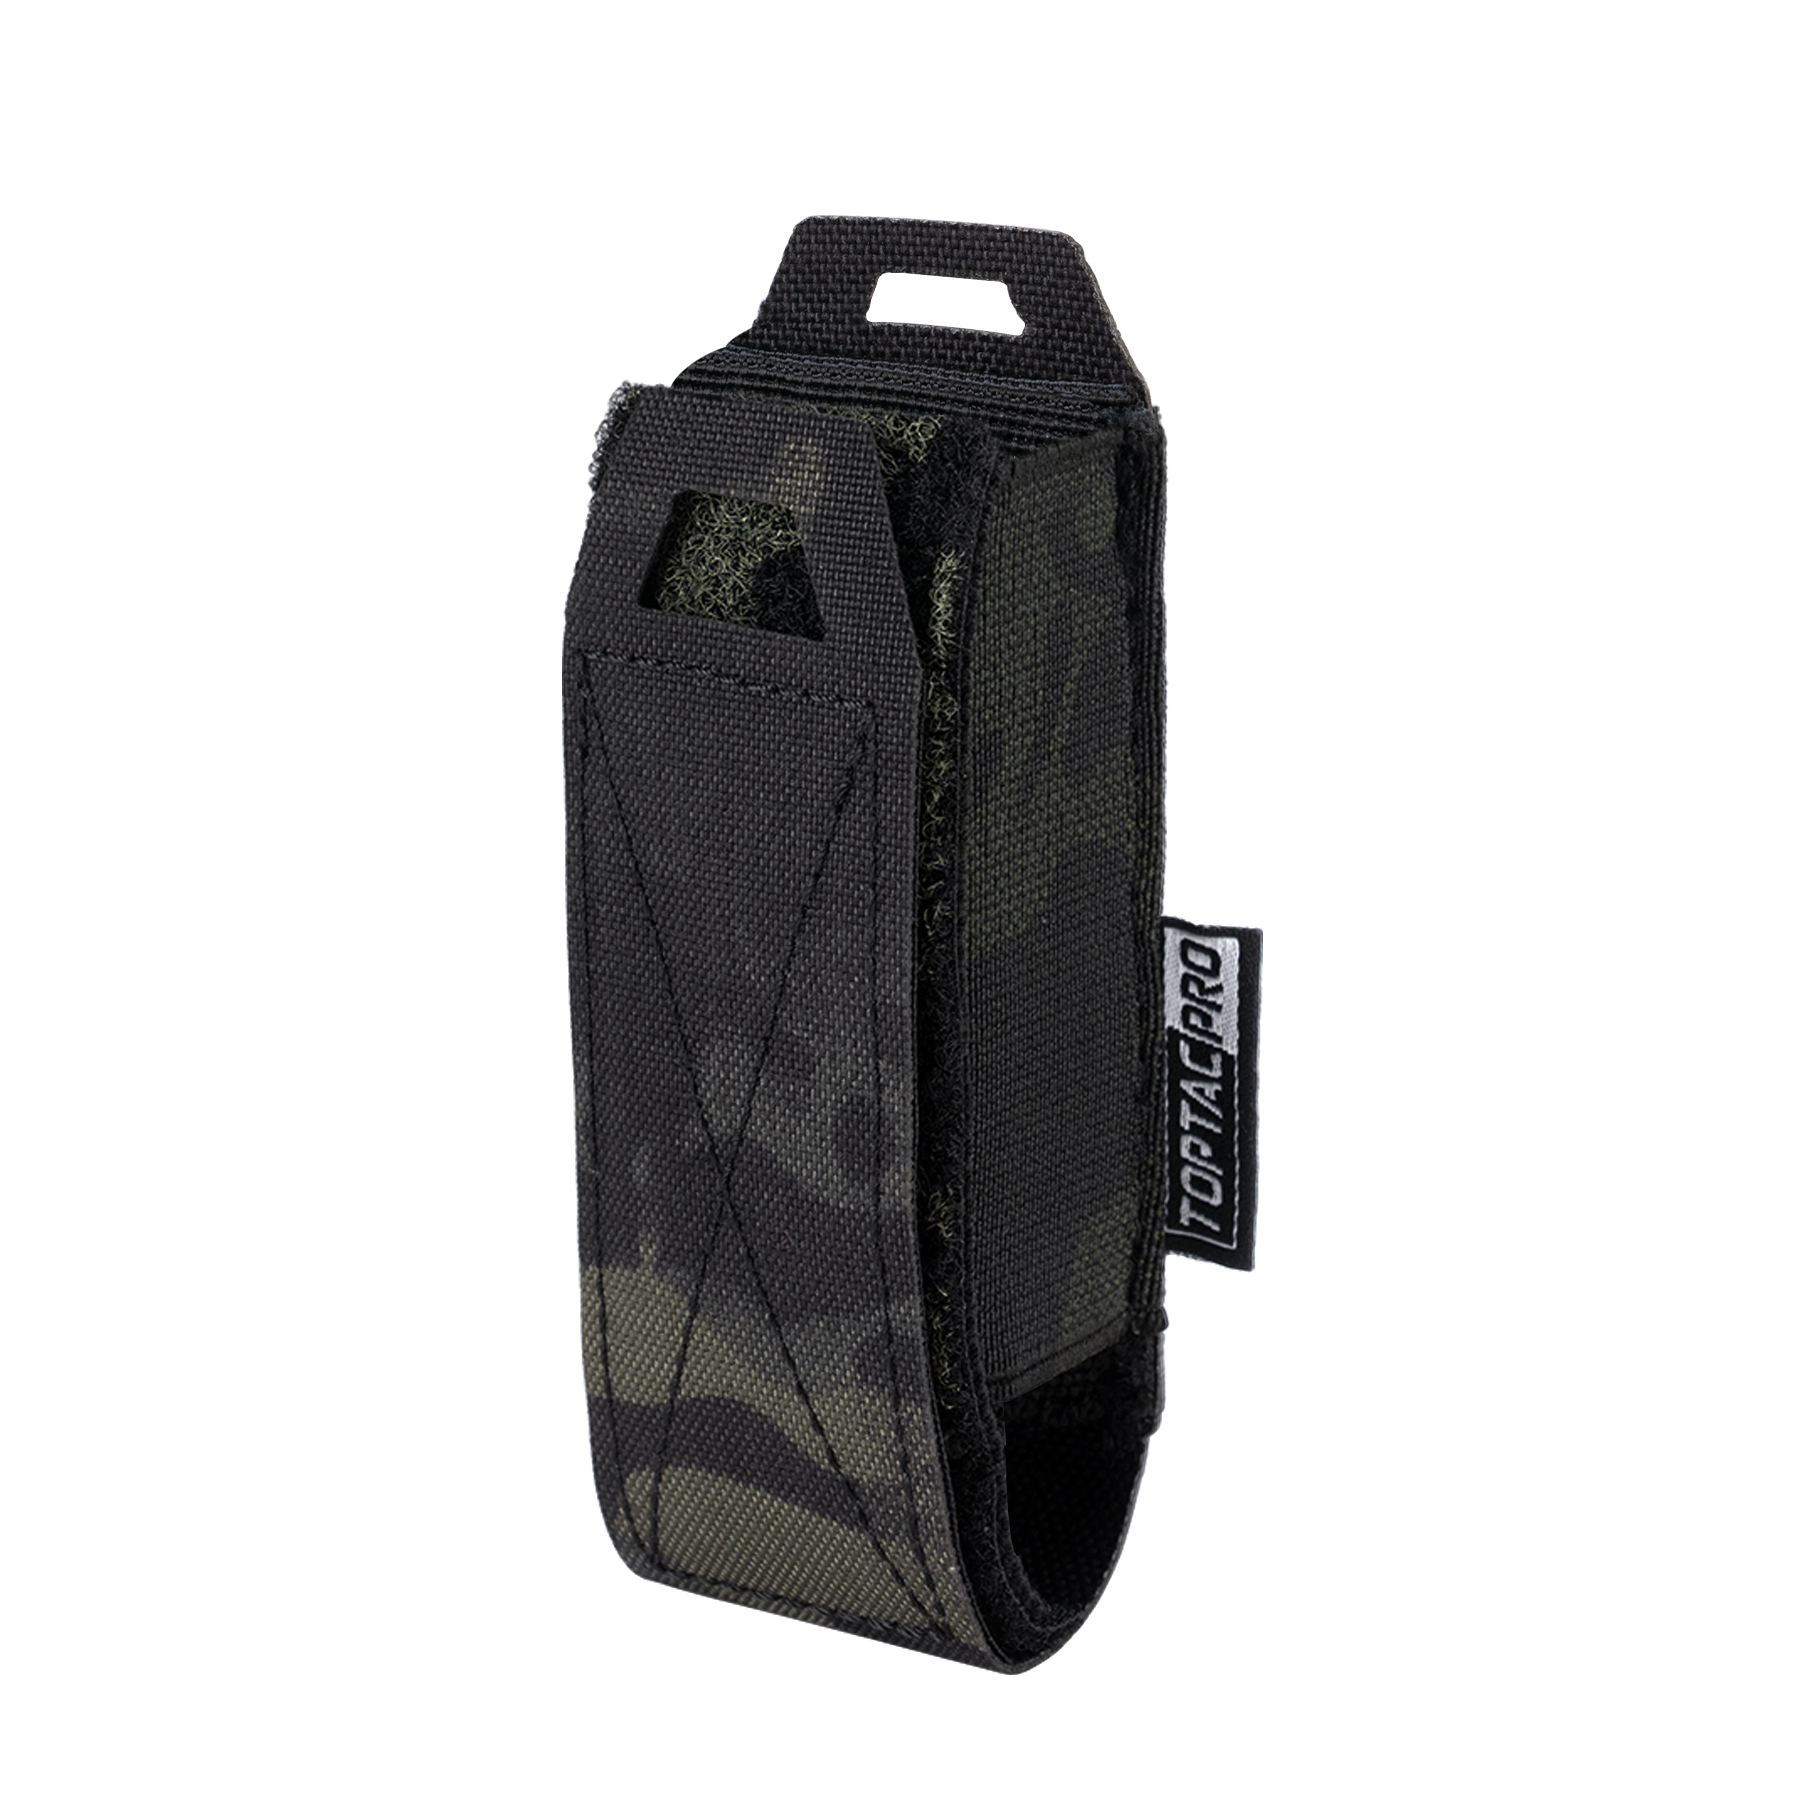 TOPTACPRO Tactical Mag Pouch 9mm Pistol Mag Carrier Fast release Expandable MOLLE 8501-IDOGEAR INDUSTRIAL